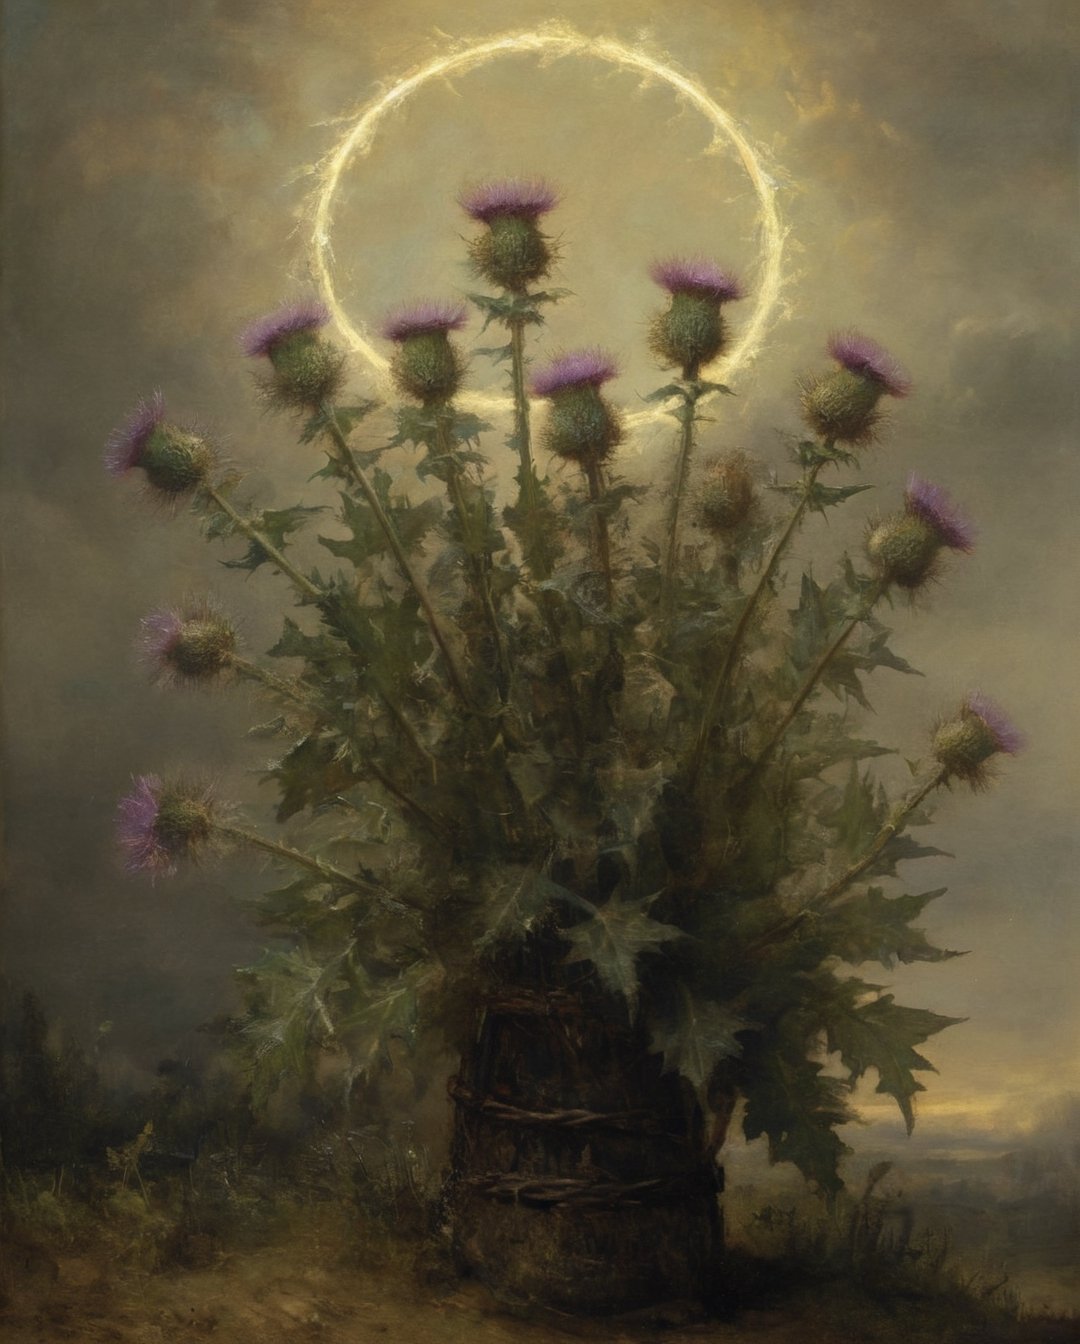 A halo of thistles by Rembrandt 